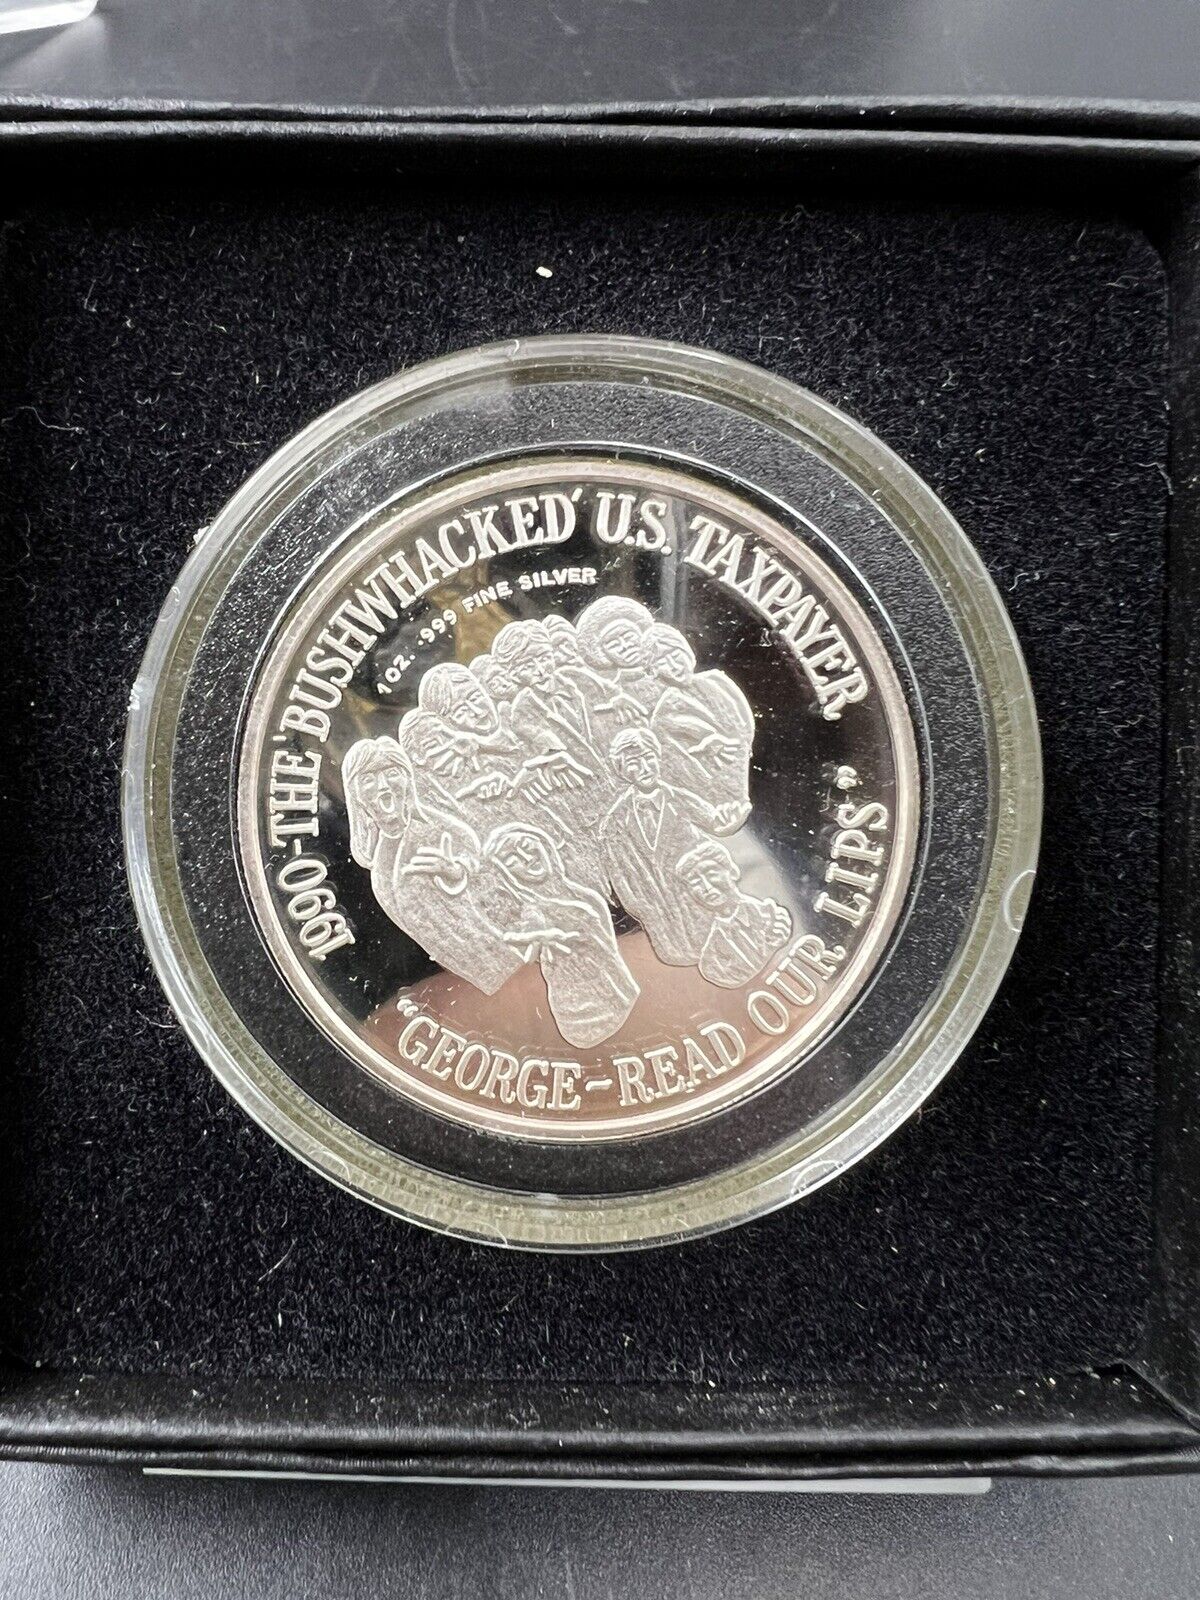 1990 Modern Hard Times 1 Oz Silver Round " Bushwhacked US Taxpayer " Proof Coin